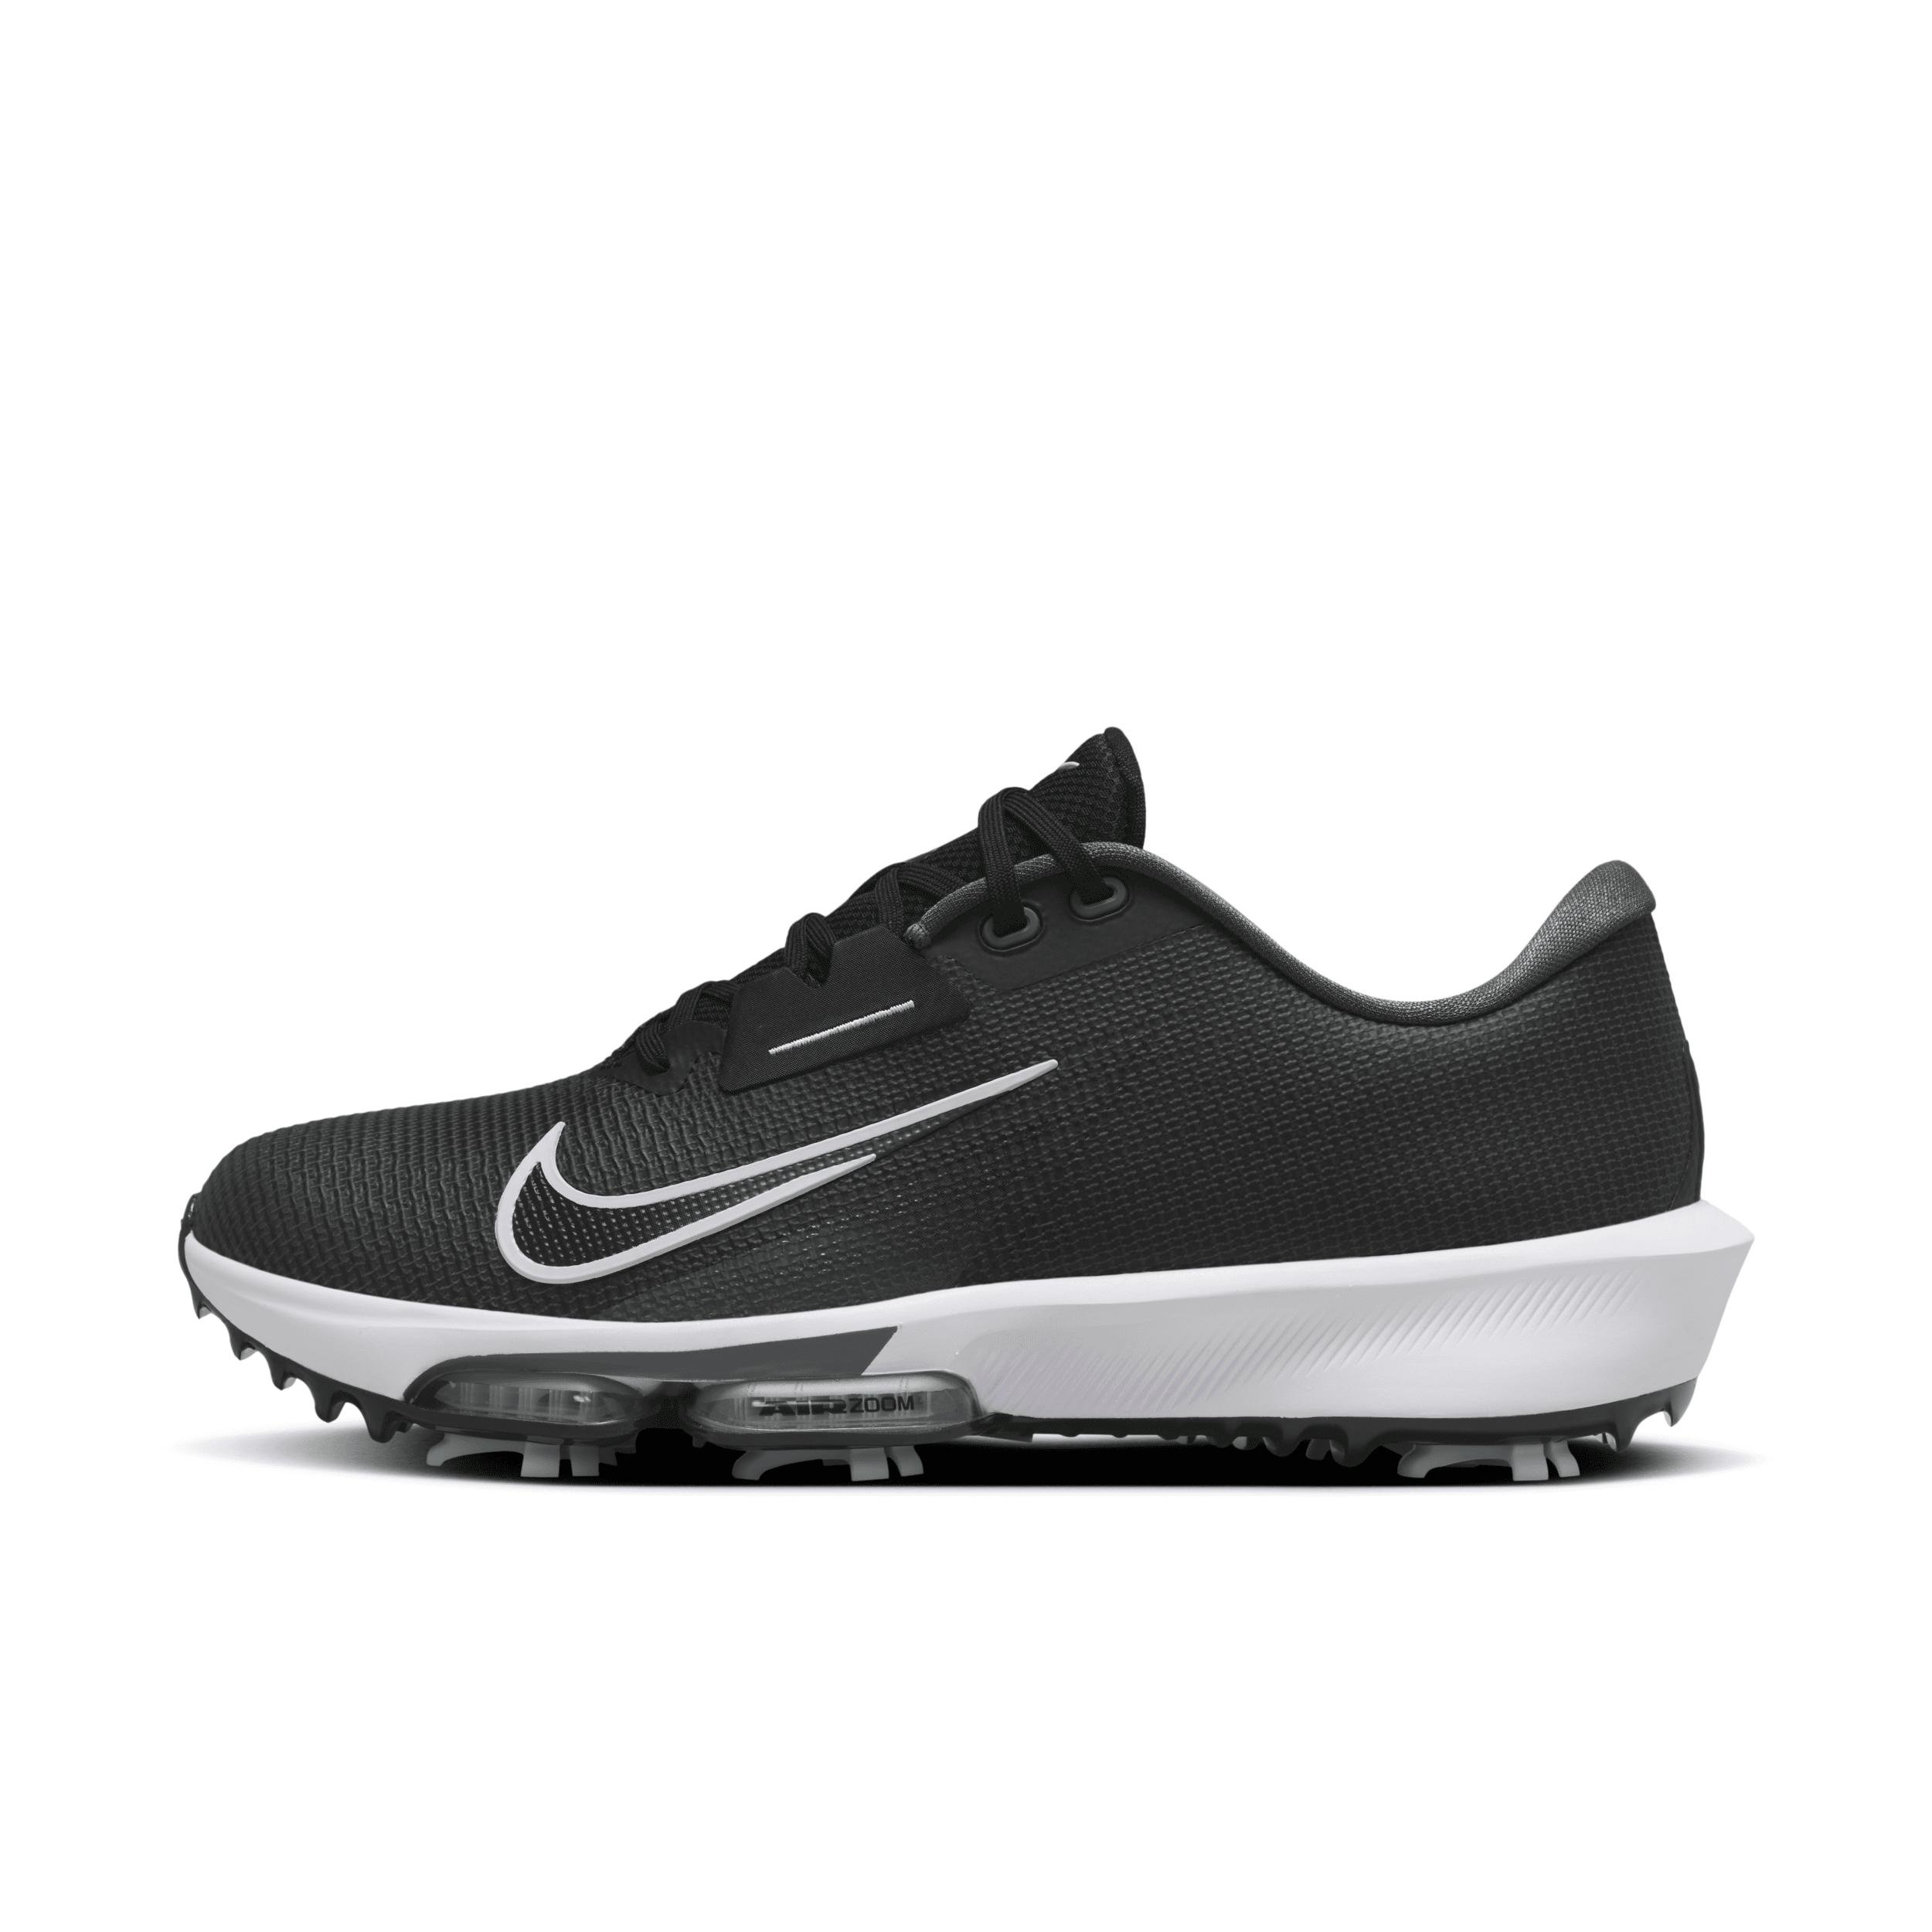 Nike Men's Infinity Tour 2 Golf Shoes by NIKE